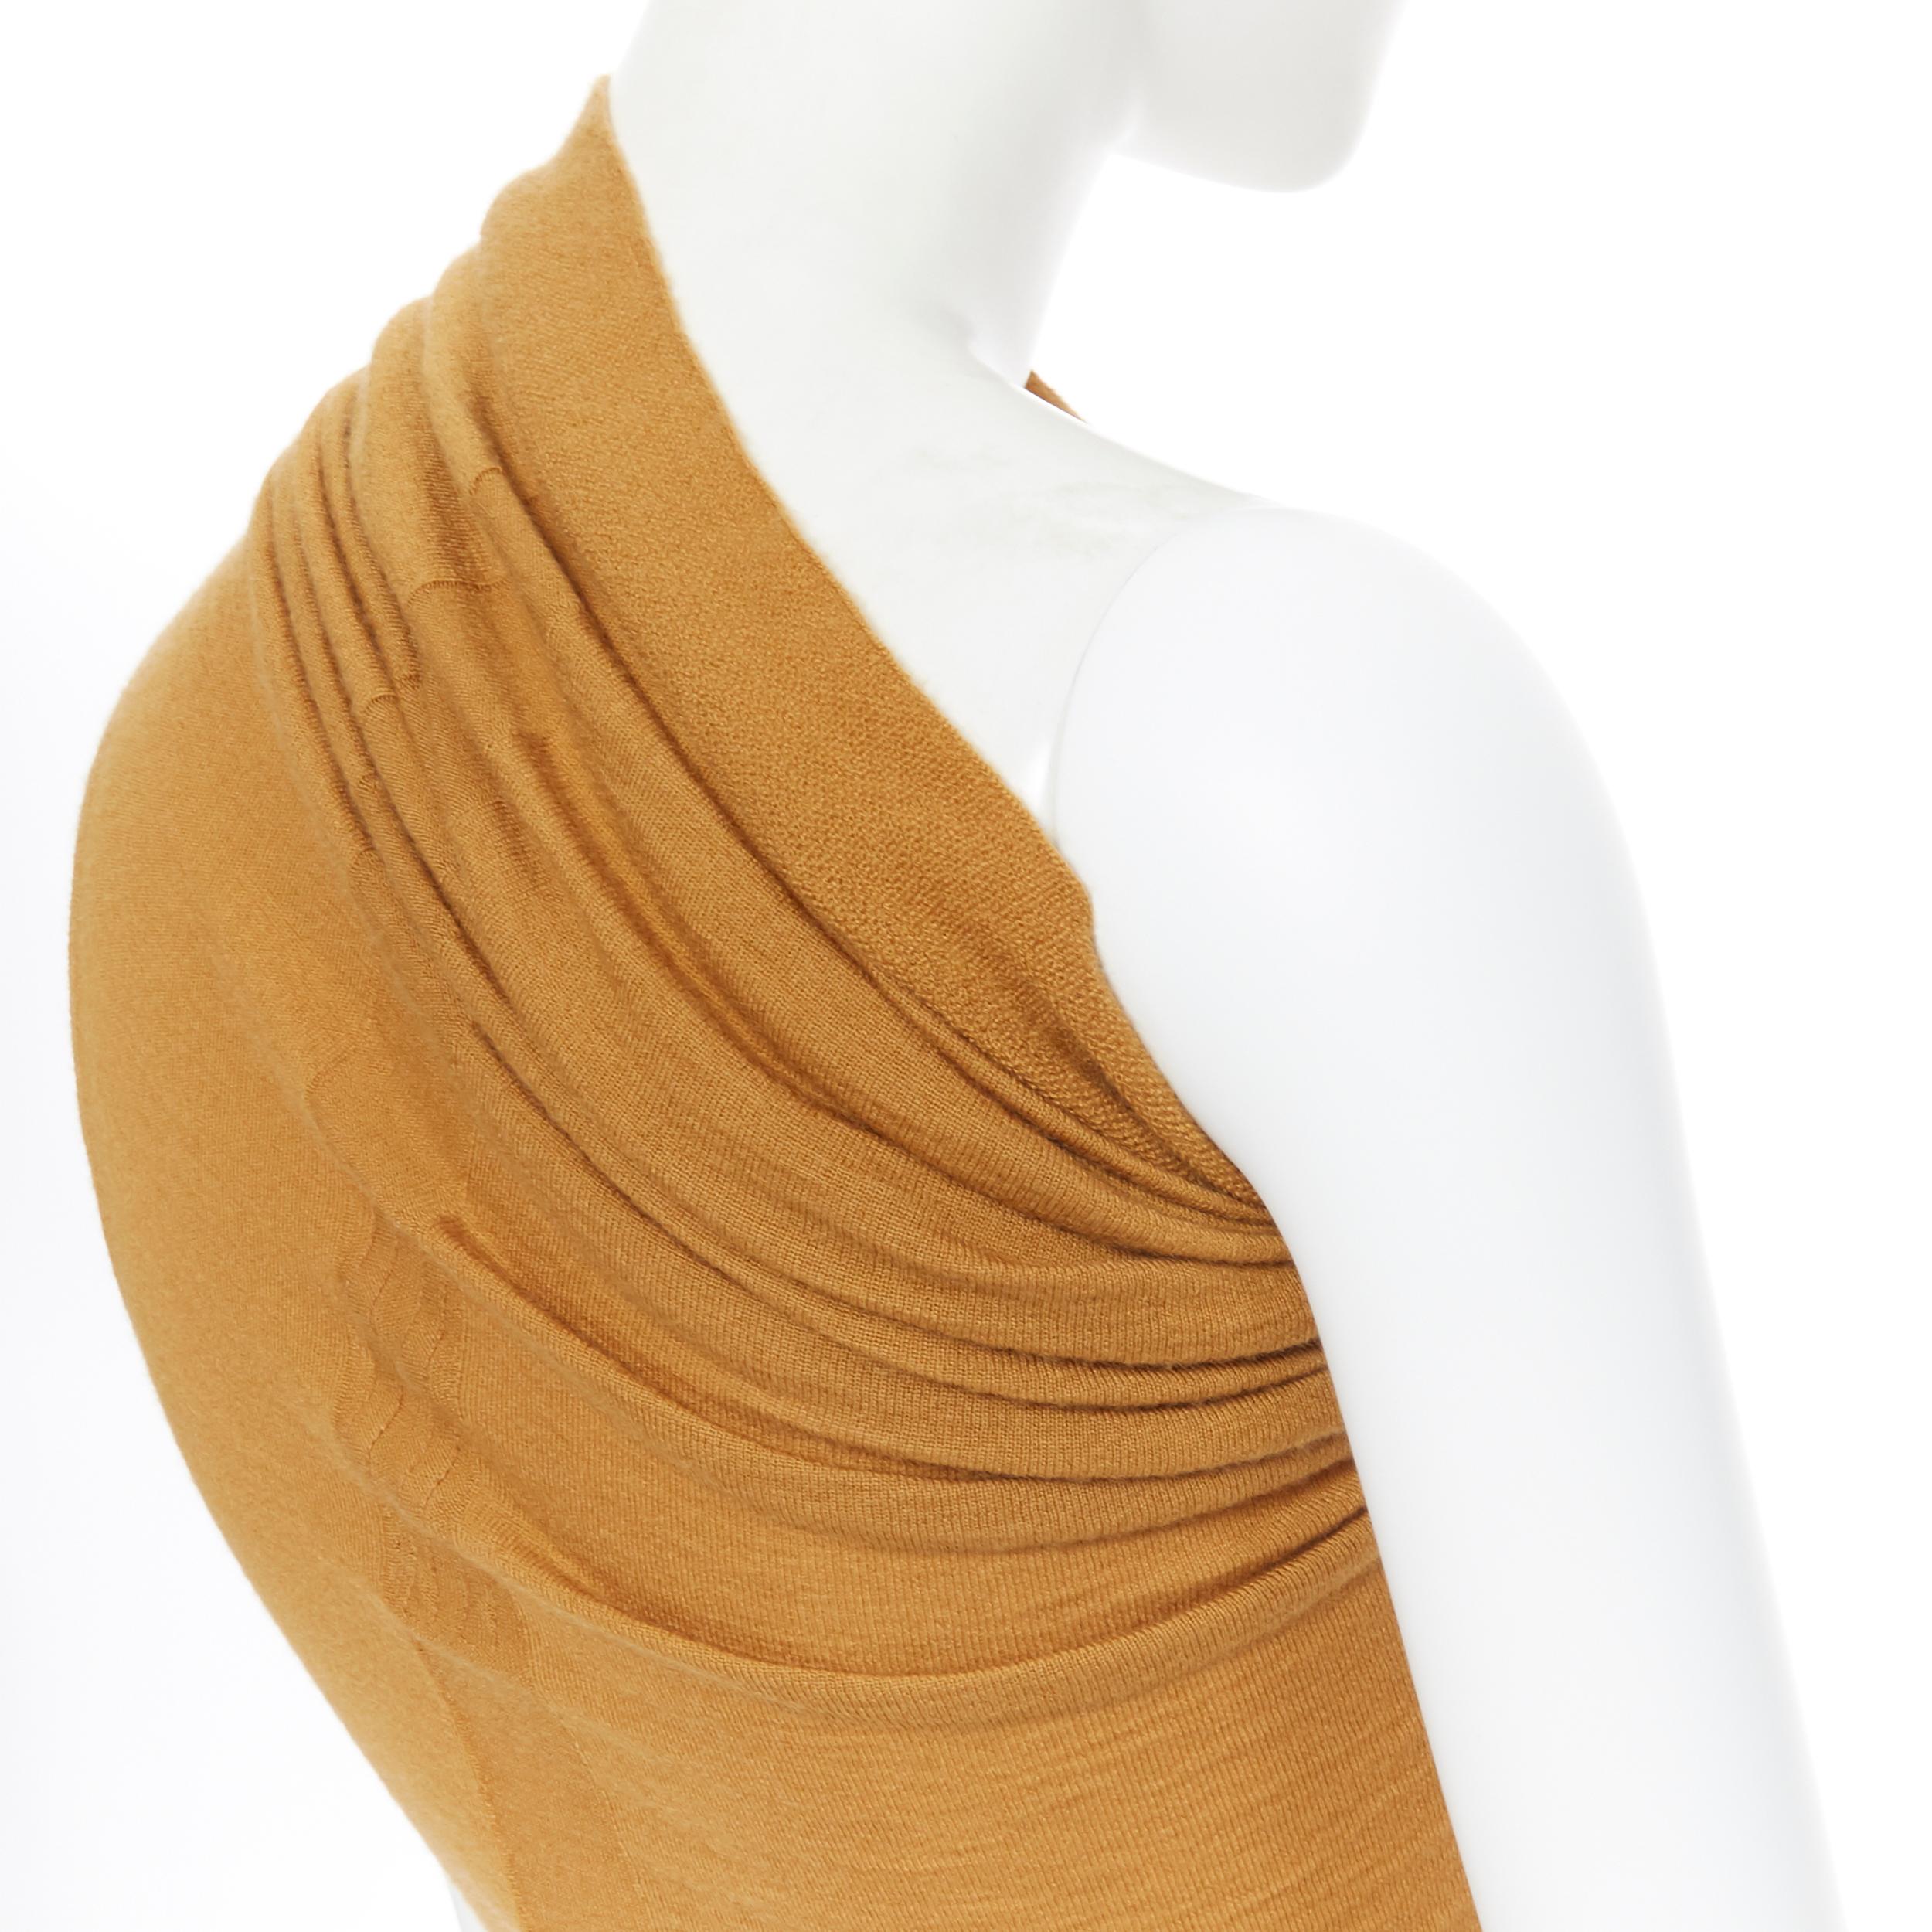 new RICK OWENS AW18 Sisyphus Runway mustard cashmere knit one shoulder top S
Brand: Rick Owens
Designer: Rick Owens
Collection: AW18
Model Name / Style: Cashmere top
Material: Cashmere blend
Color: Brown
Pattern: Solid
Extra Detail: Signature stripe